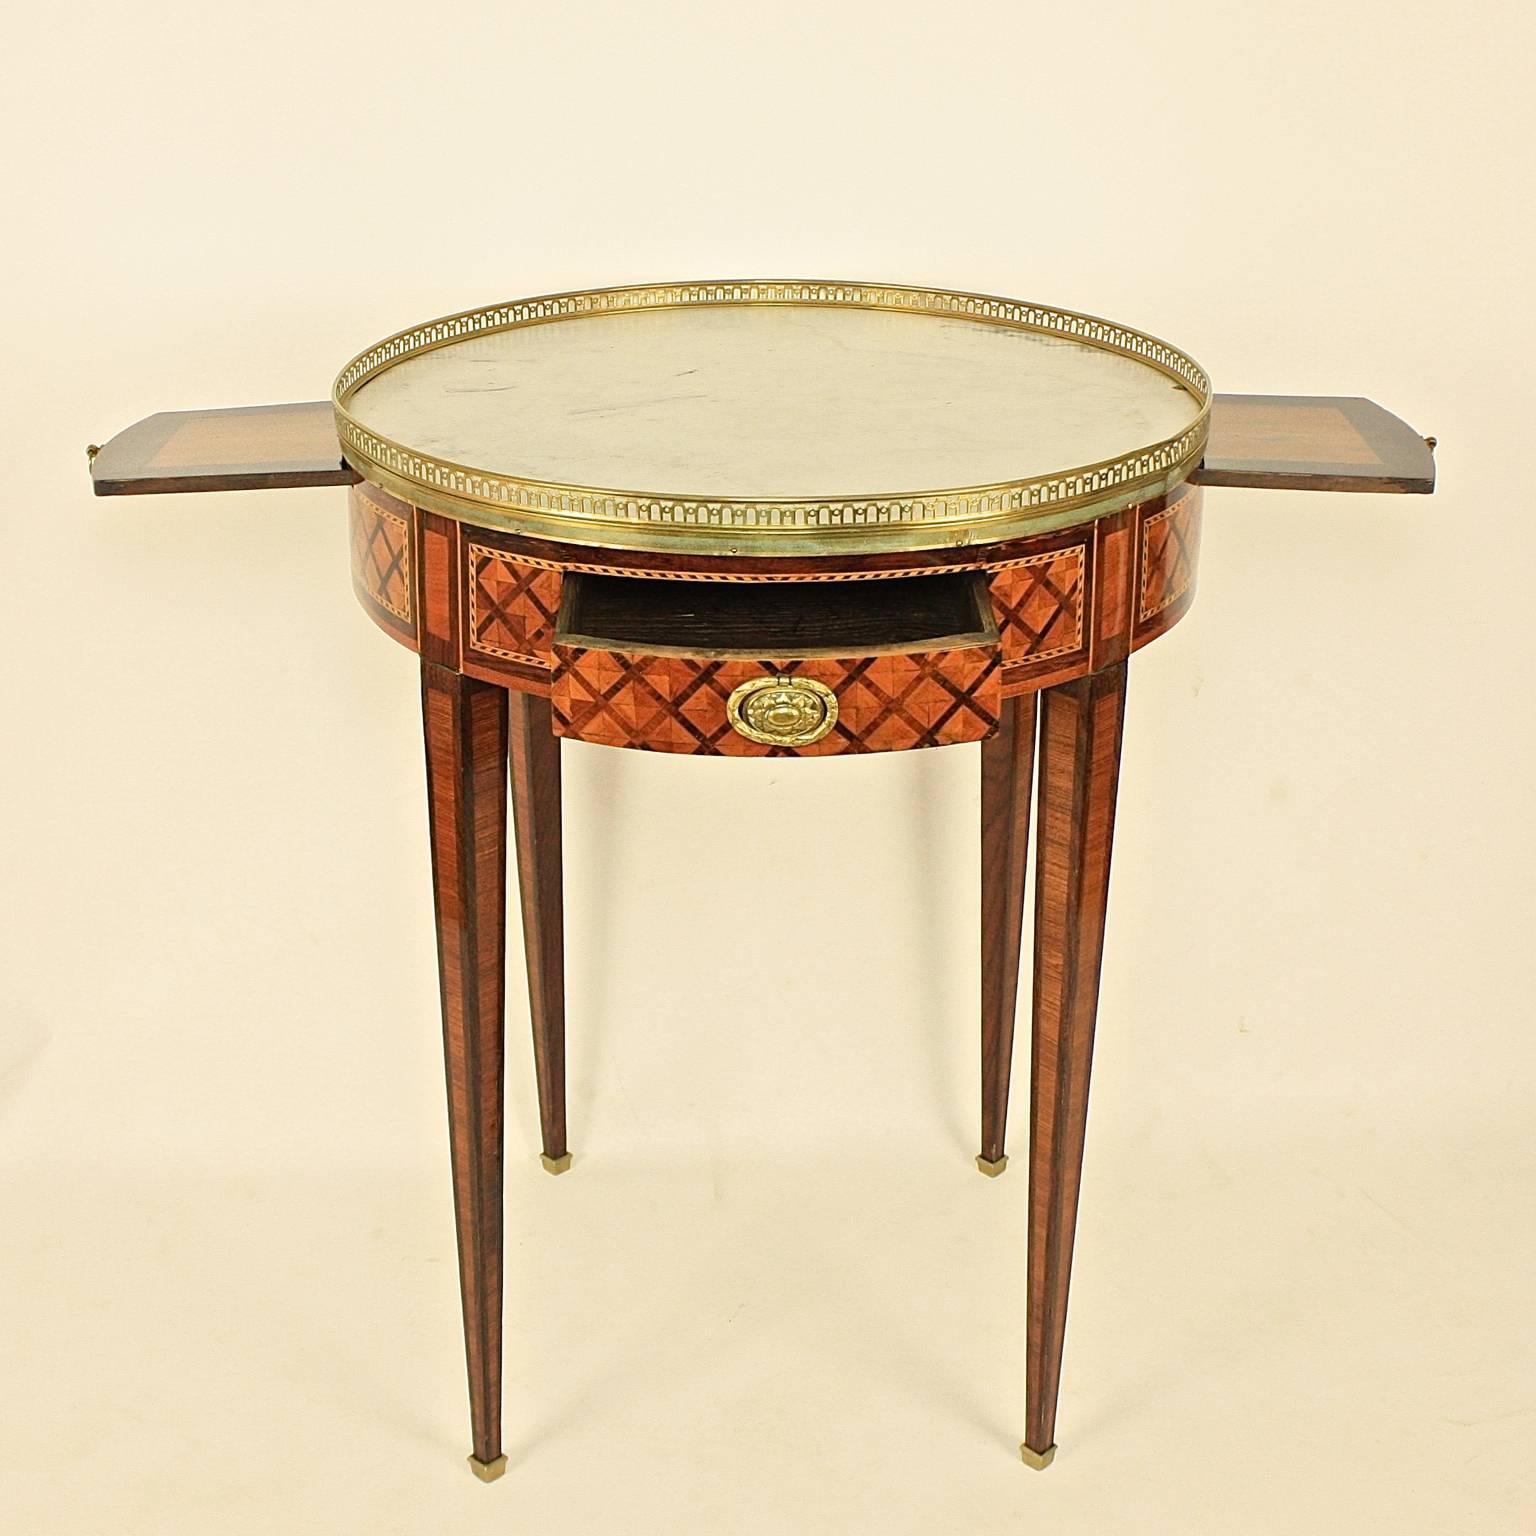 A 19th century Louis XVI bouillotte table, with a white mottled round marble-top within a pierced brass gallery, above a frieze with kingwood and tulipwood trellis work marquetry, two drawers and two candle slides, on square tapering legs with